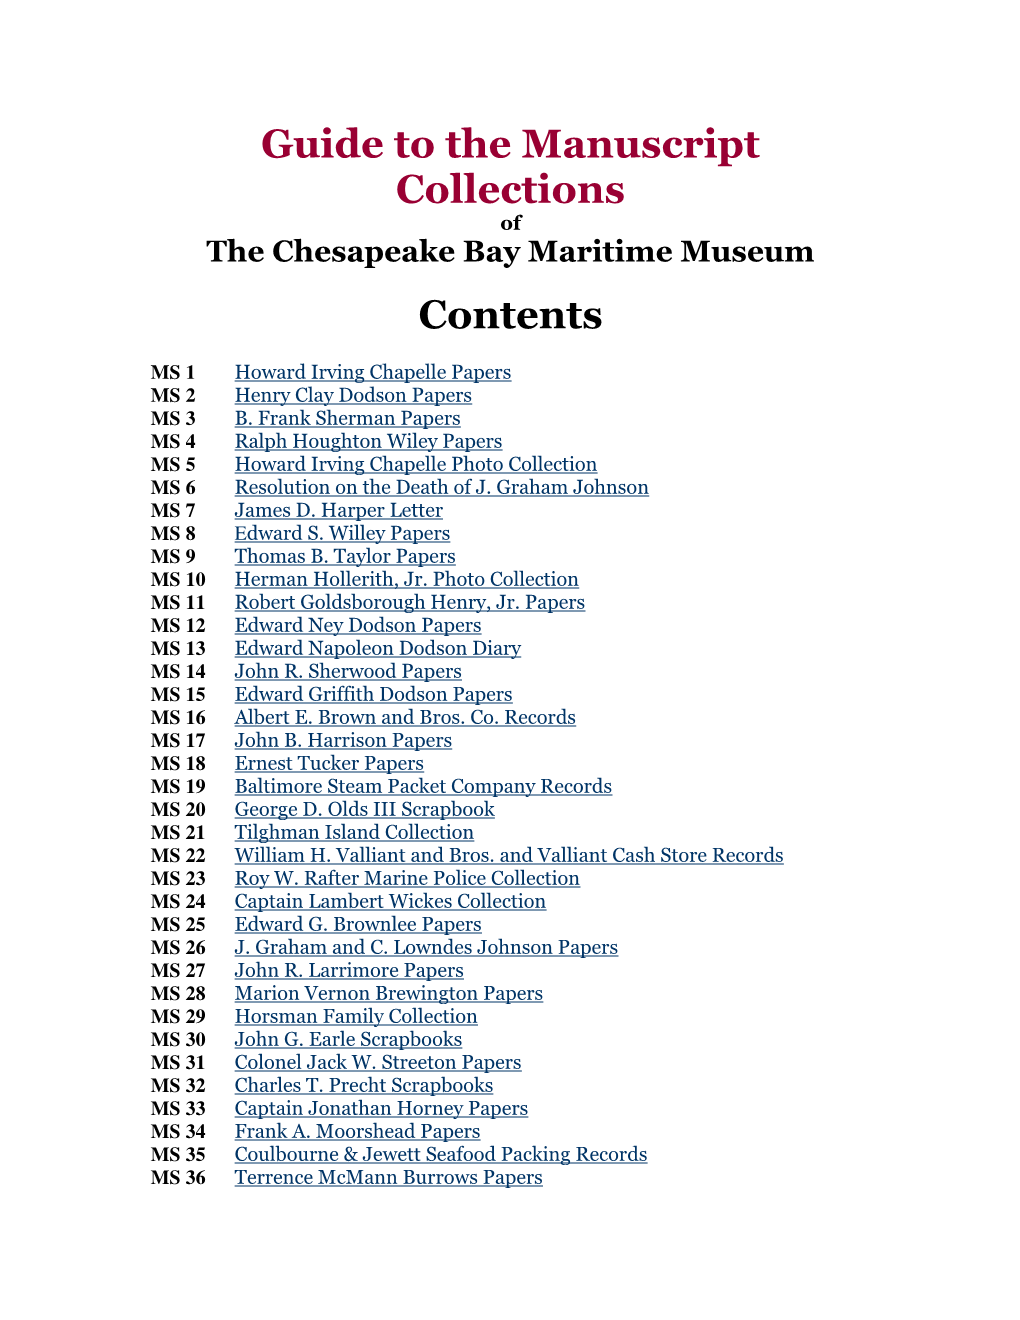 Guide to the Manuscript Collections of the Chesapeake Bay Maritime Museum